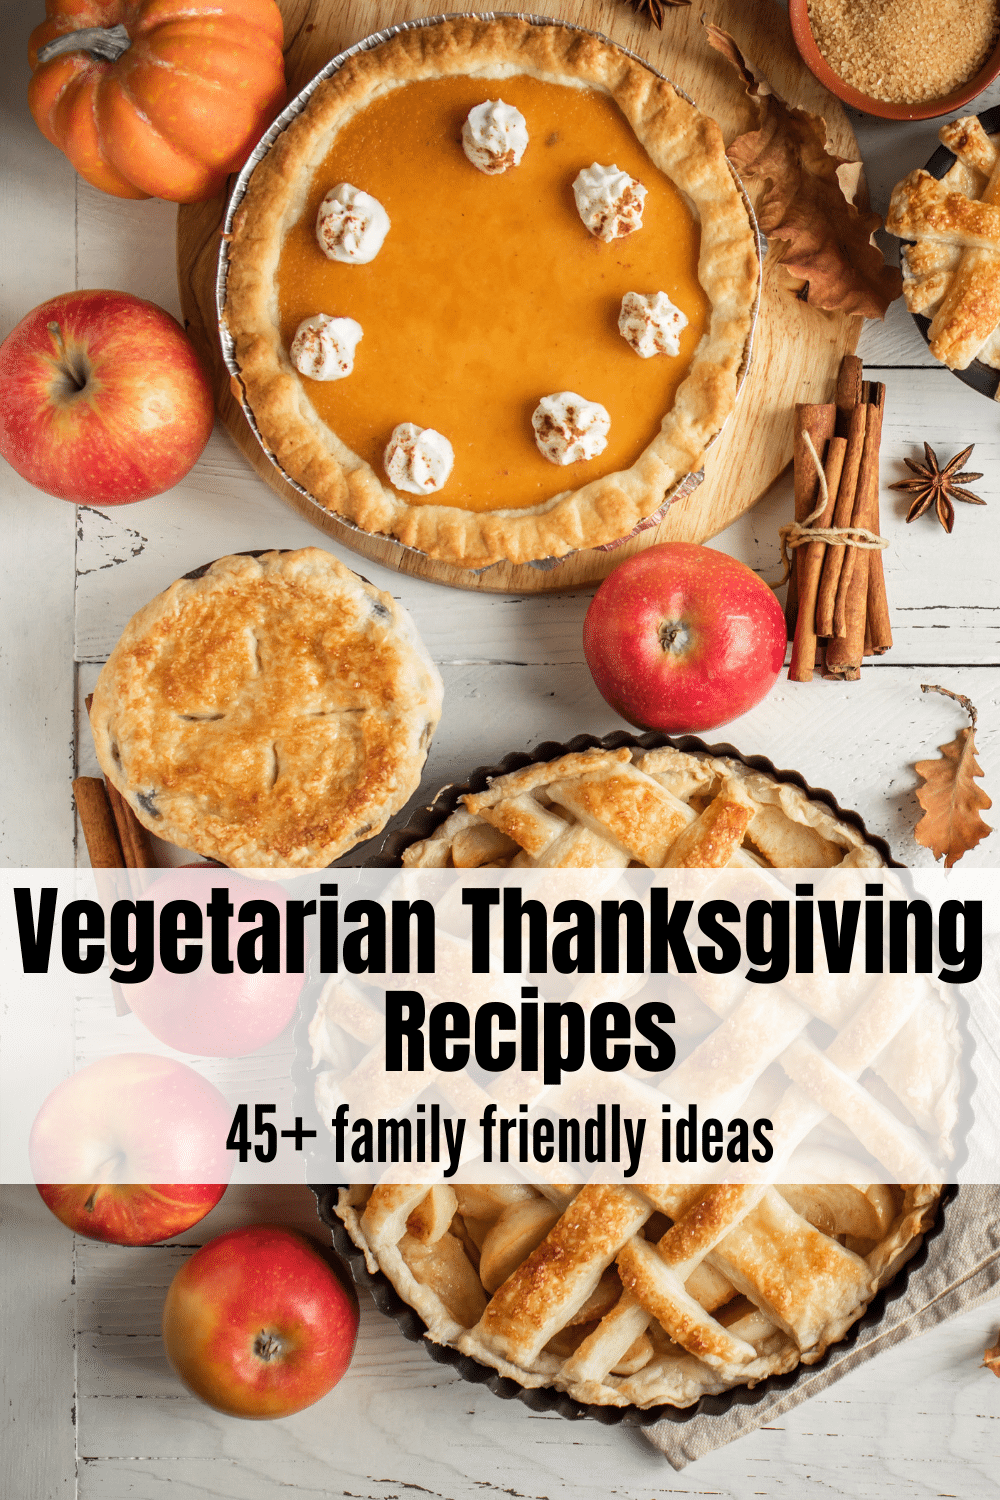 Looking for Vegetarian Thanksgiving Recipes? Read on to see over45+ Vegetarian Thanksgiving Recipes that are delicious and easy to make. #VegetarianThanksgivingRecipes #VeganThanksgivingRecipes